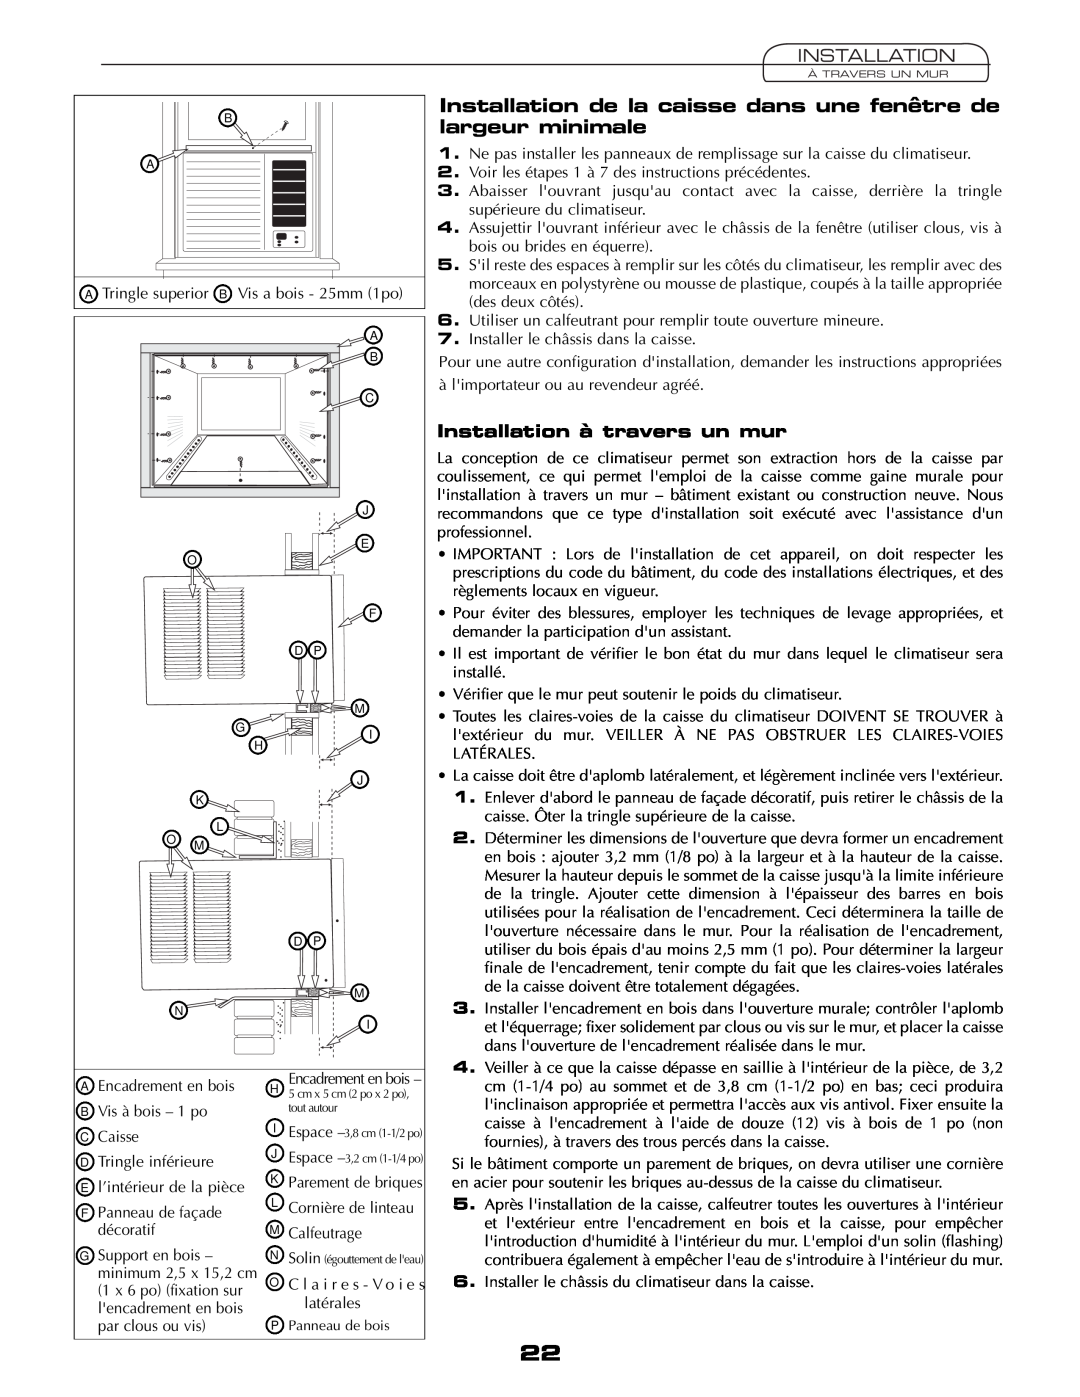 Fedders AEY08F2B important safety instructions Installation à travers un mur 